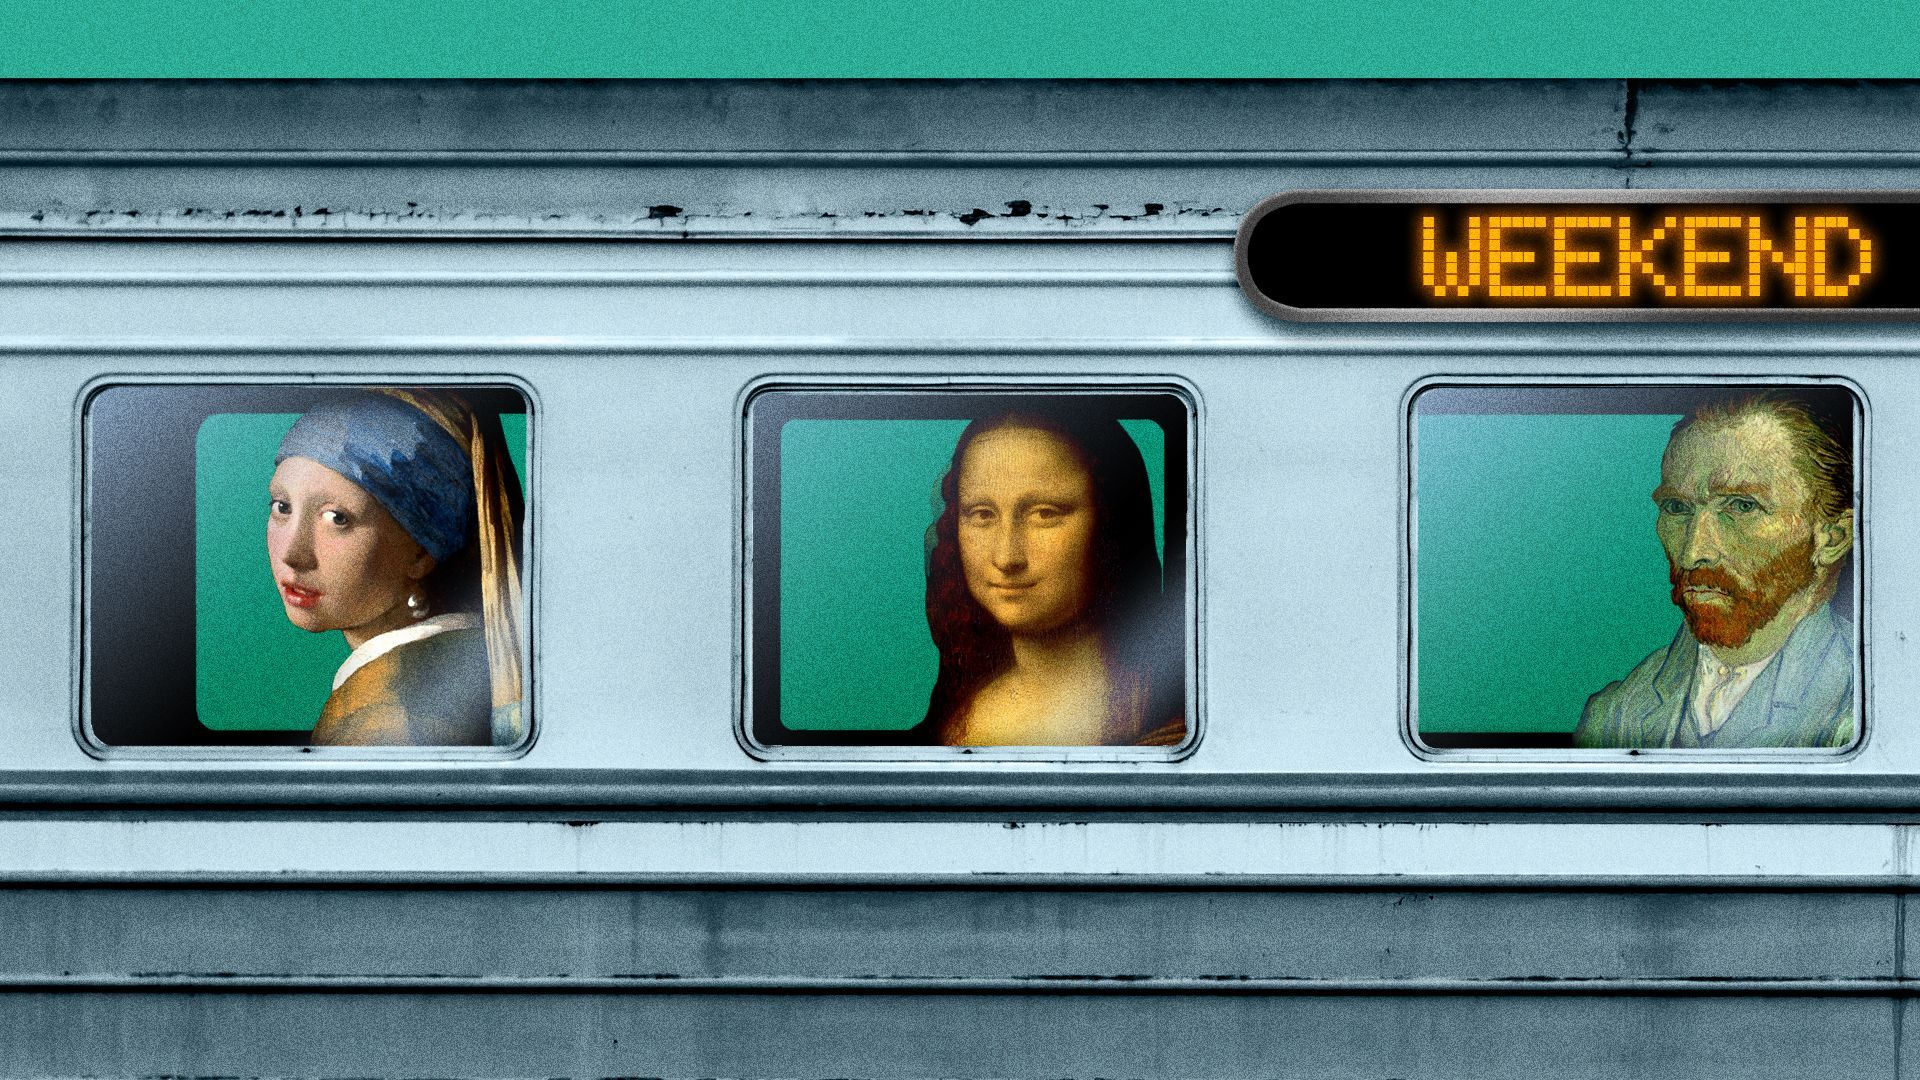 Illustration of famous paintings riding the subway. The destination says "weekend." 